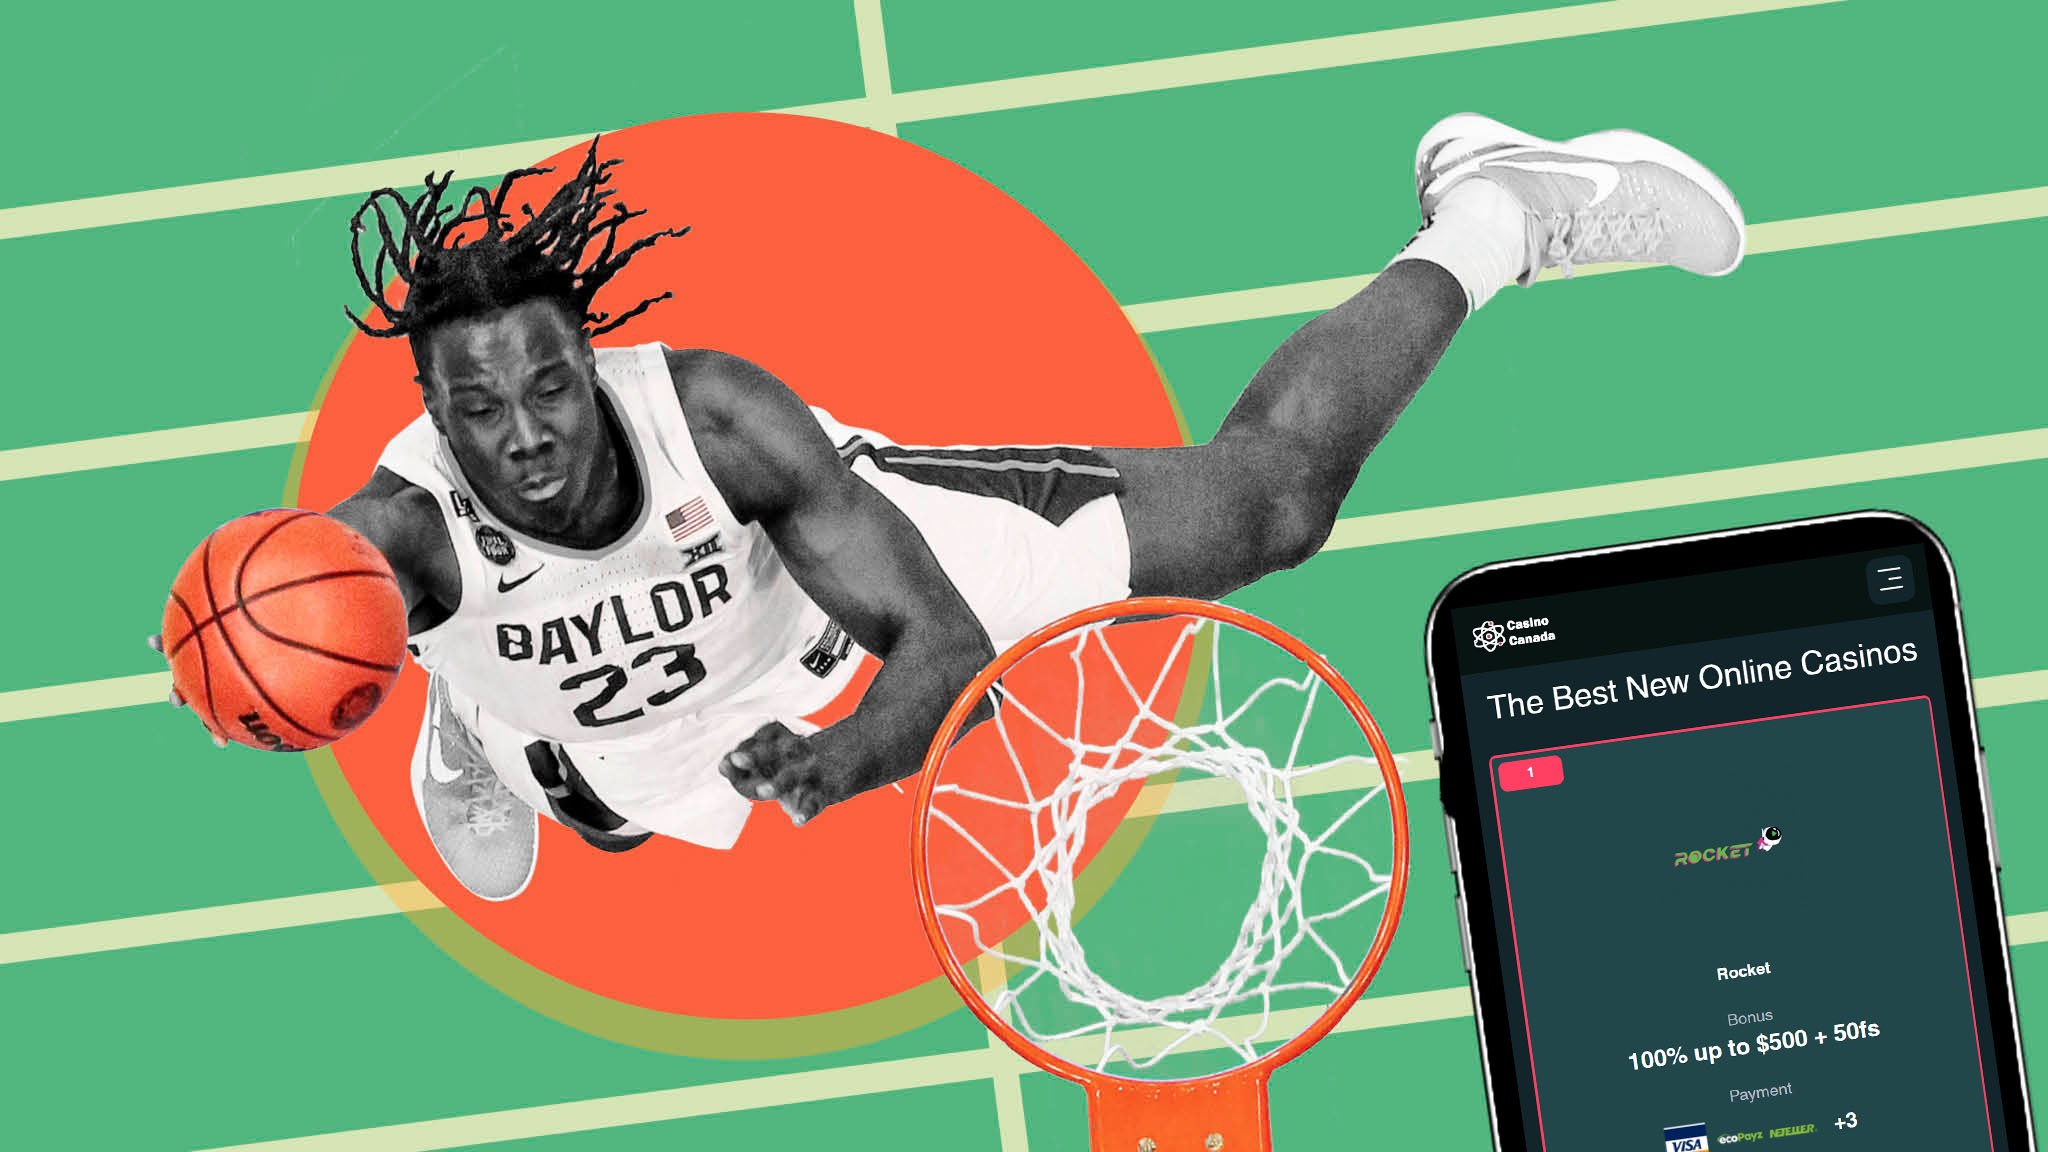 Basketball Stars Transition into the Online Casino Industry